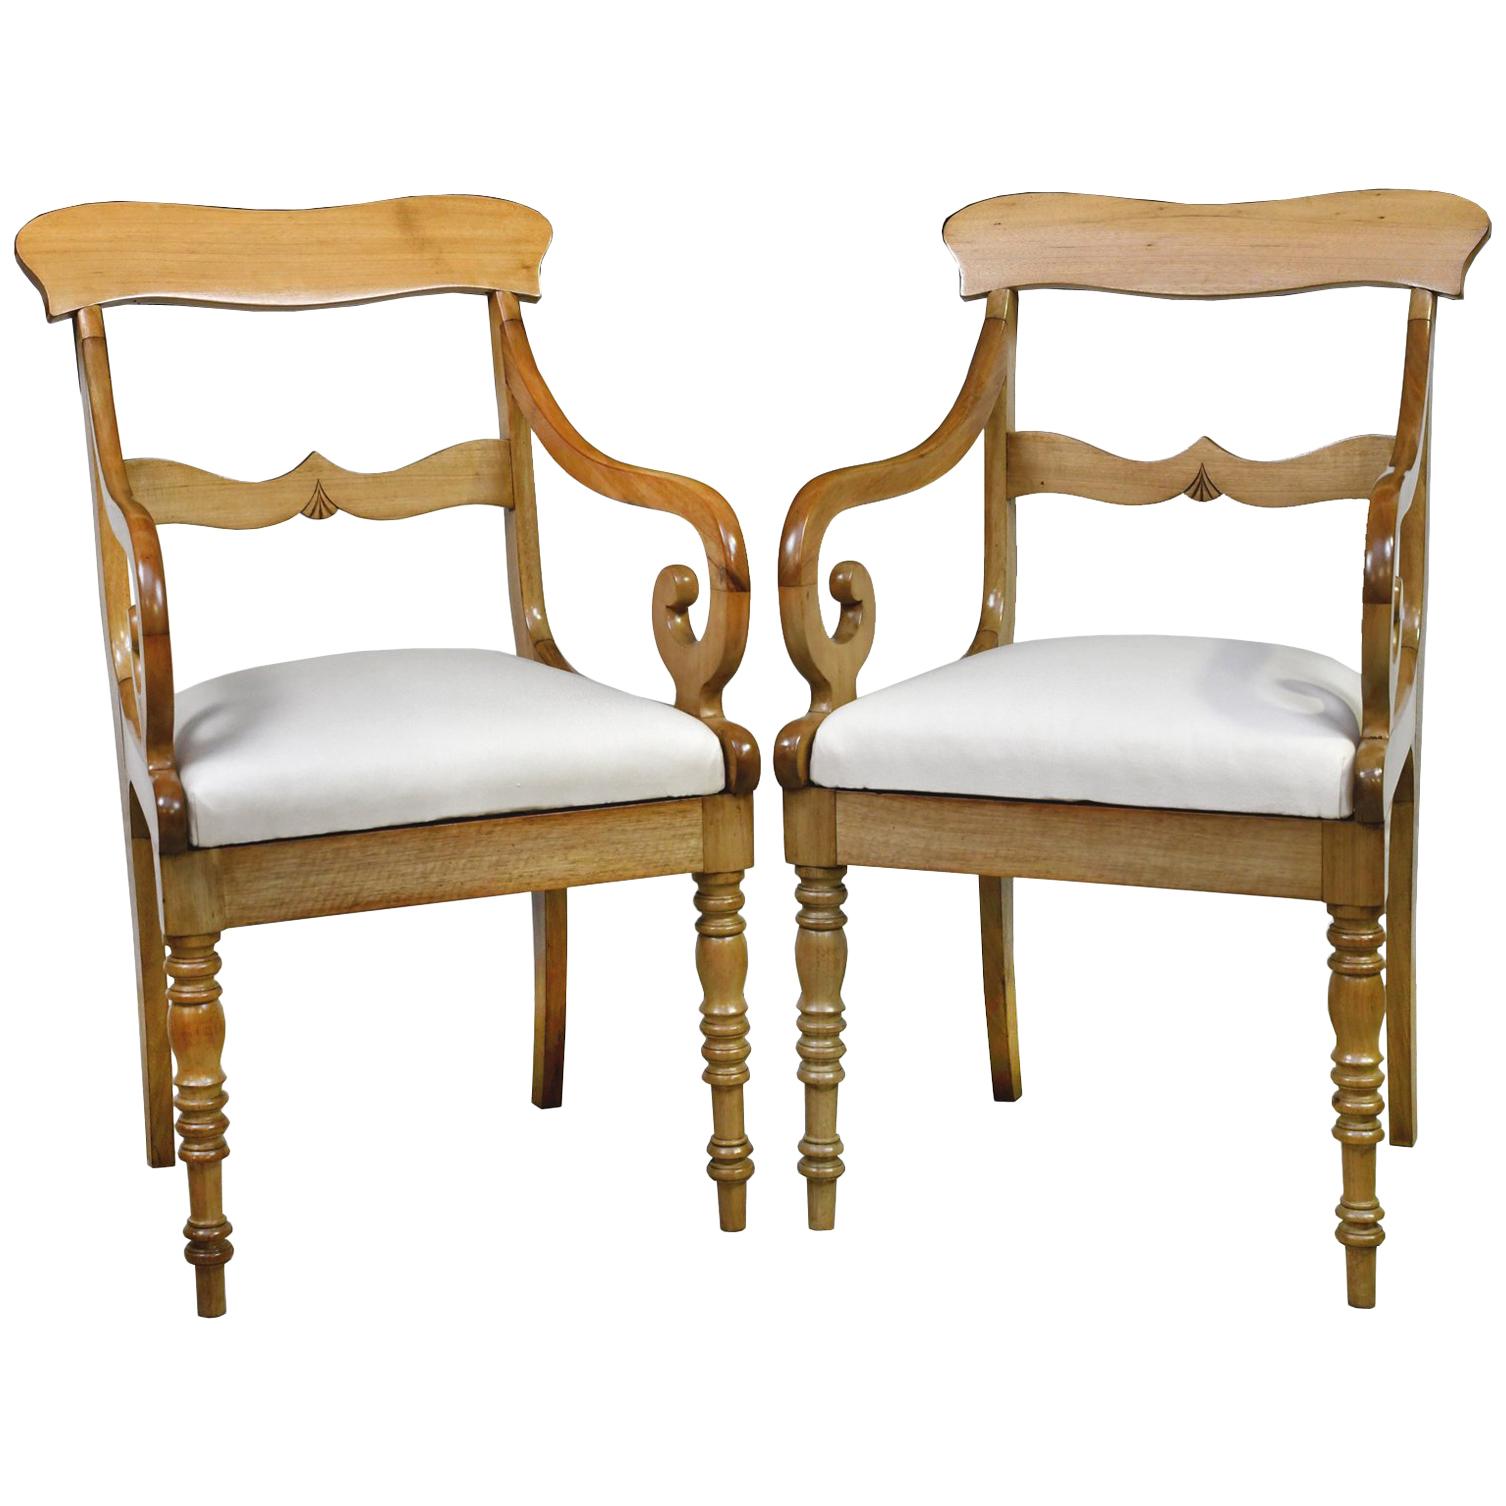 A fine pair of Karl Johan Swedish Biedermeier armchairs in walnut with a light-colored maple finish, with scrolled arms, slat back, turned front legs and upholstered slip seat, Sweden, circa 1825.
Measures: 20